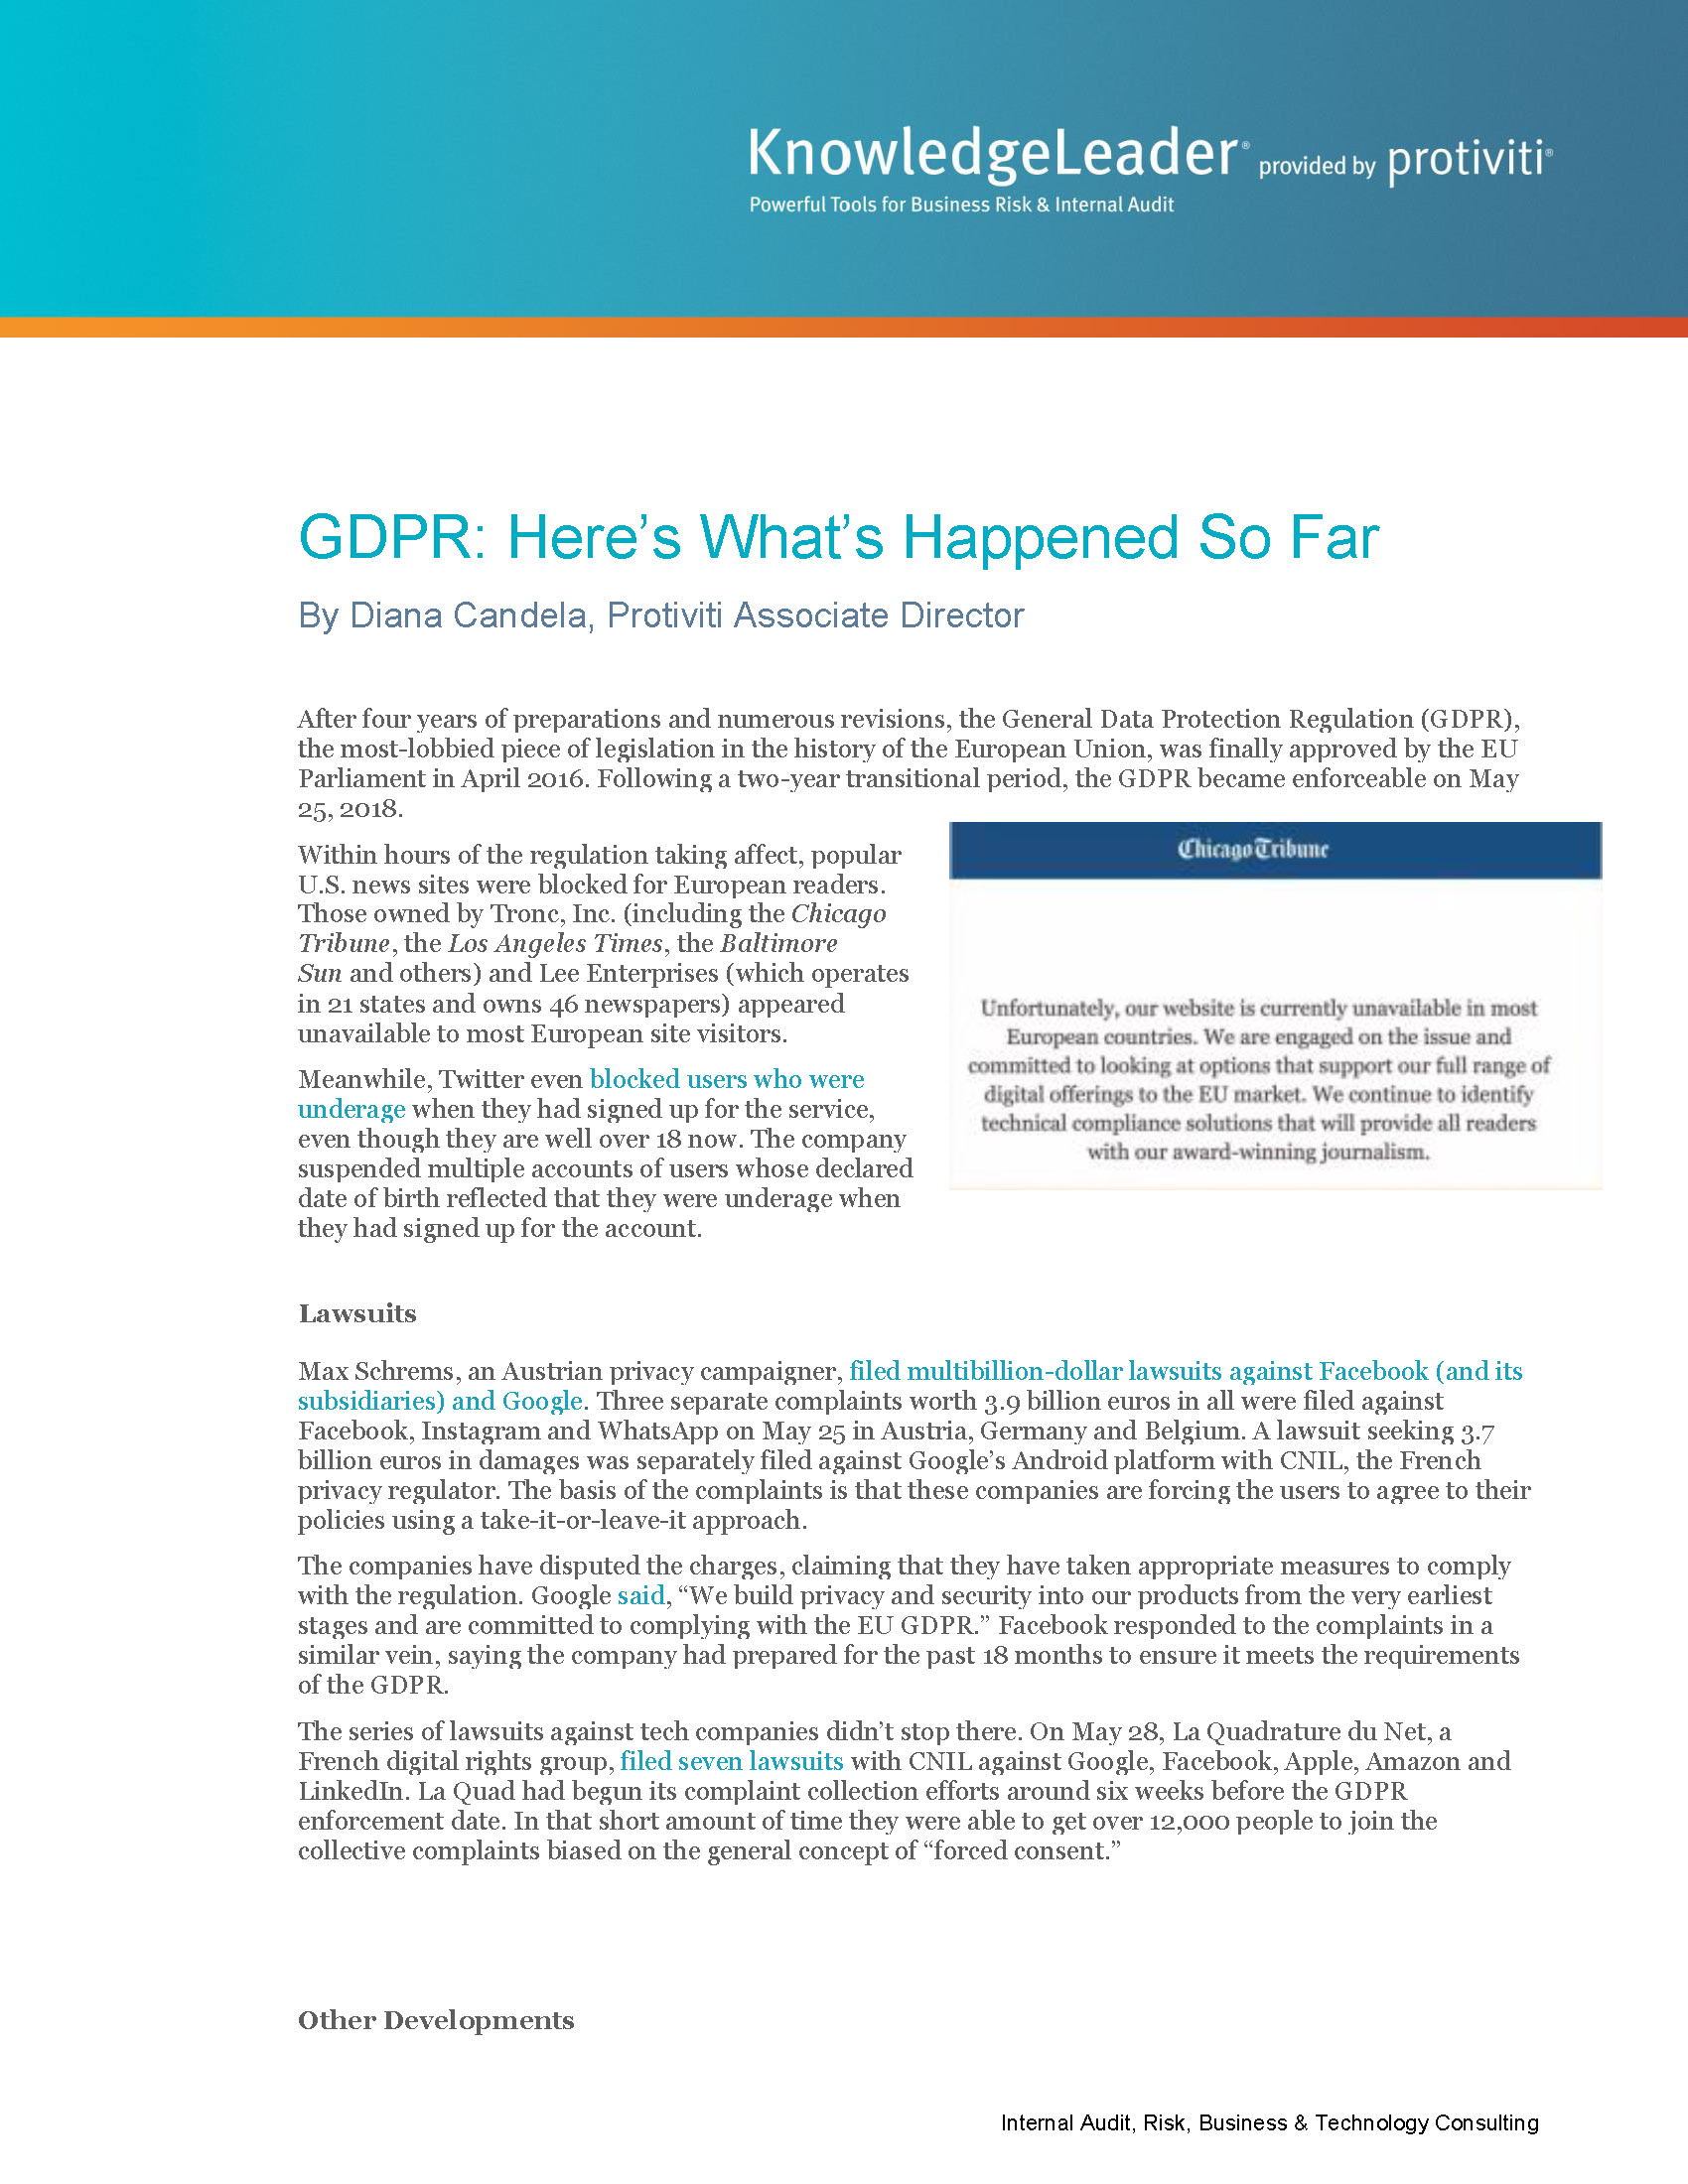 Screenshot of the first page of GDPR Here’s What’s Happened So Far